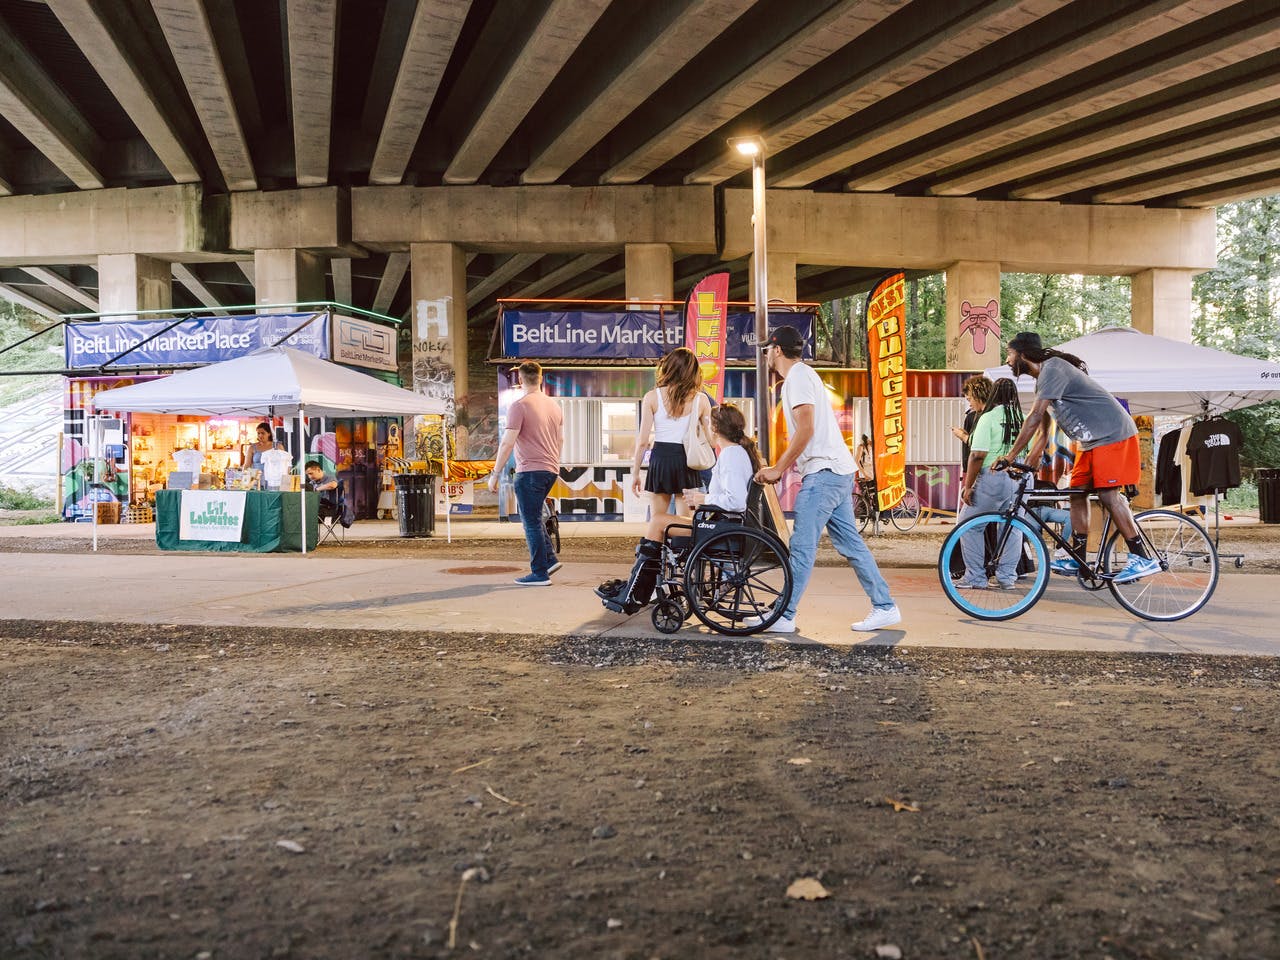 A person in a wheelchair, a person on a bike, and people walking pass by shipping container stores.